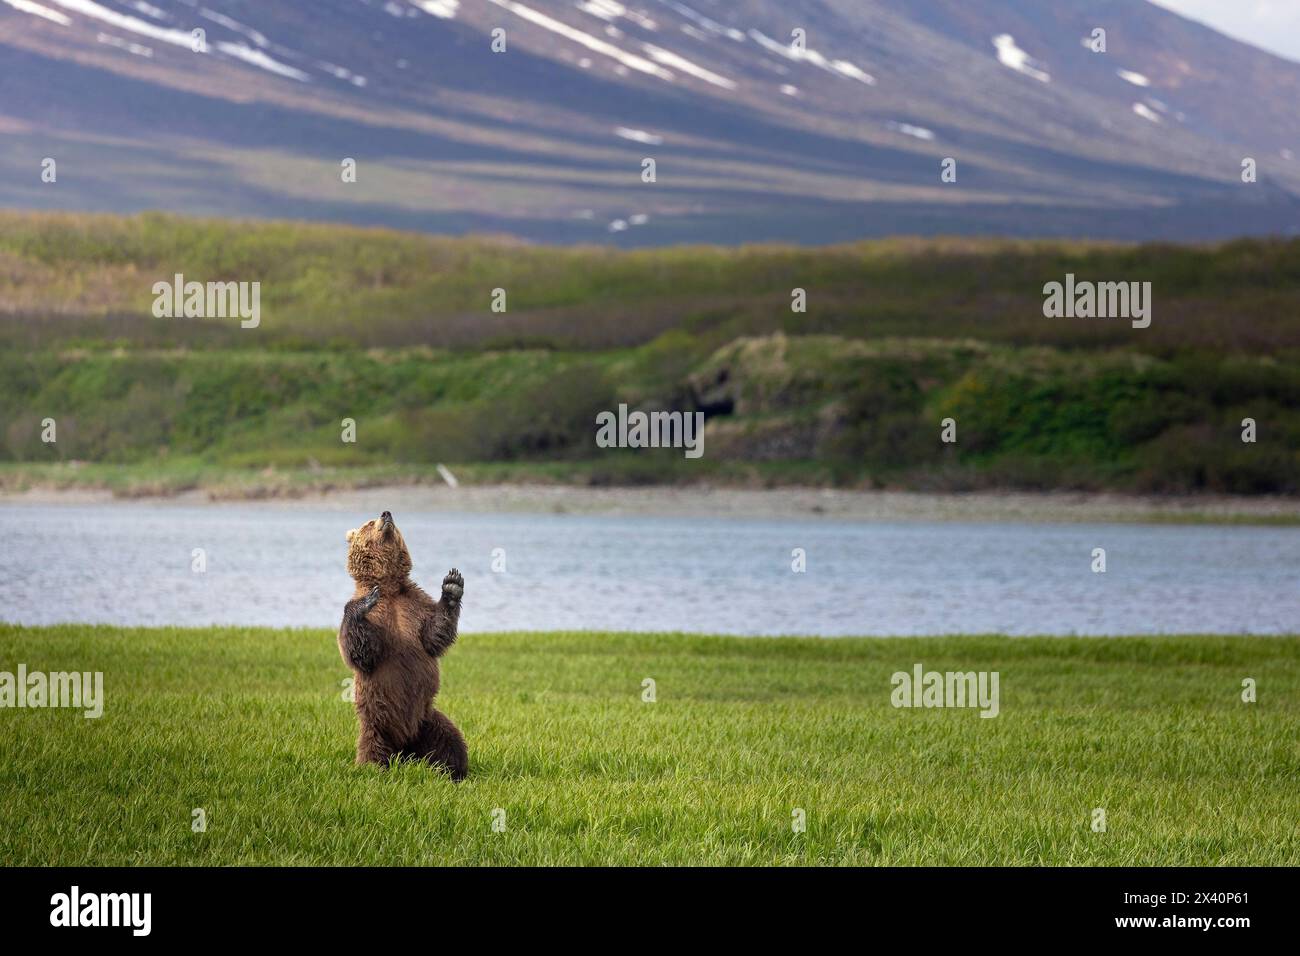 A brown bear (Ursus arctos) standing upright among the sedges, appears to dance to music only it can hear overlooking McNeil Cove in Southwestern A... Stock Photo